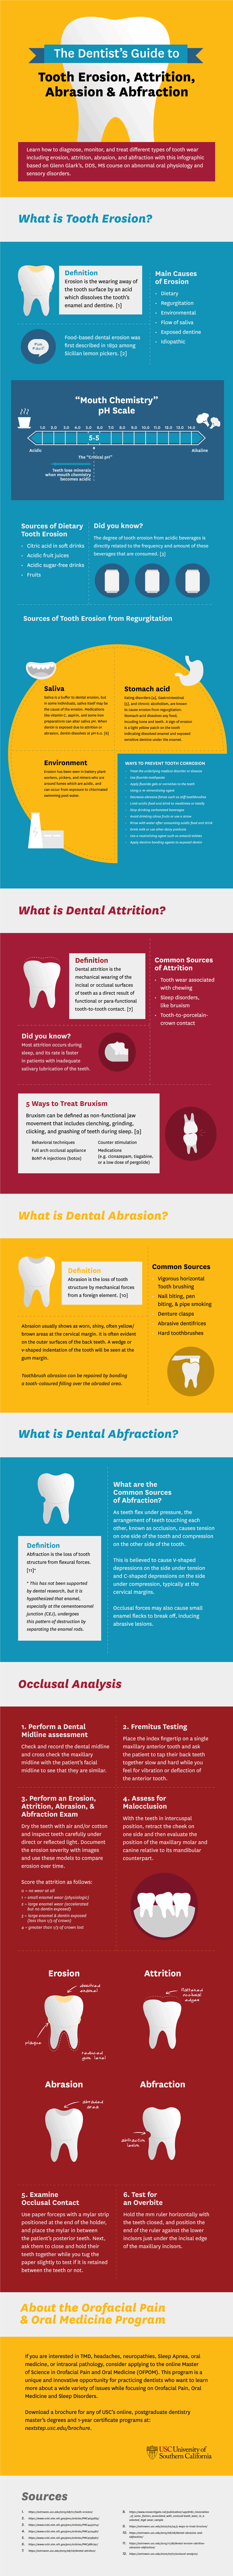 The Dentist's Guide to Tooth Erosion, Attrition, Abrasion, and Abfraction